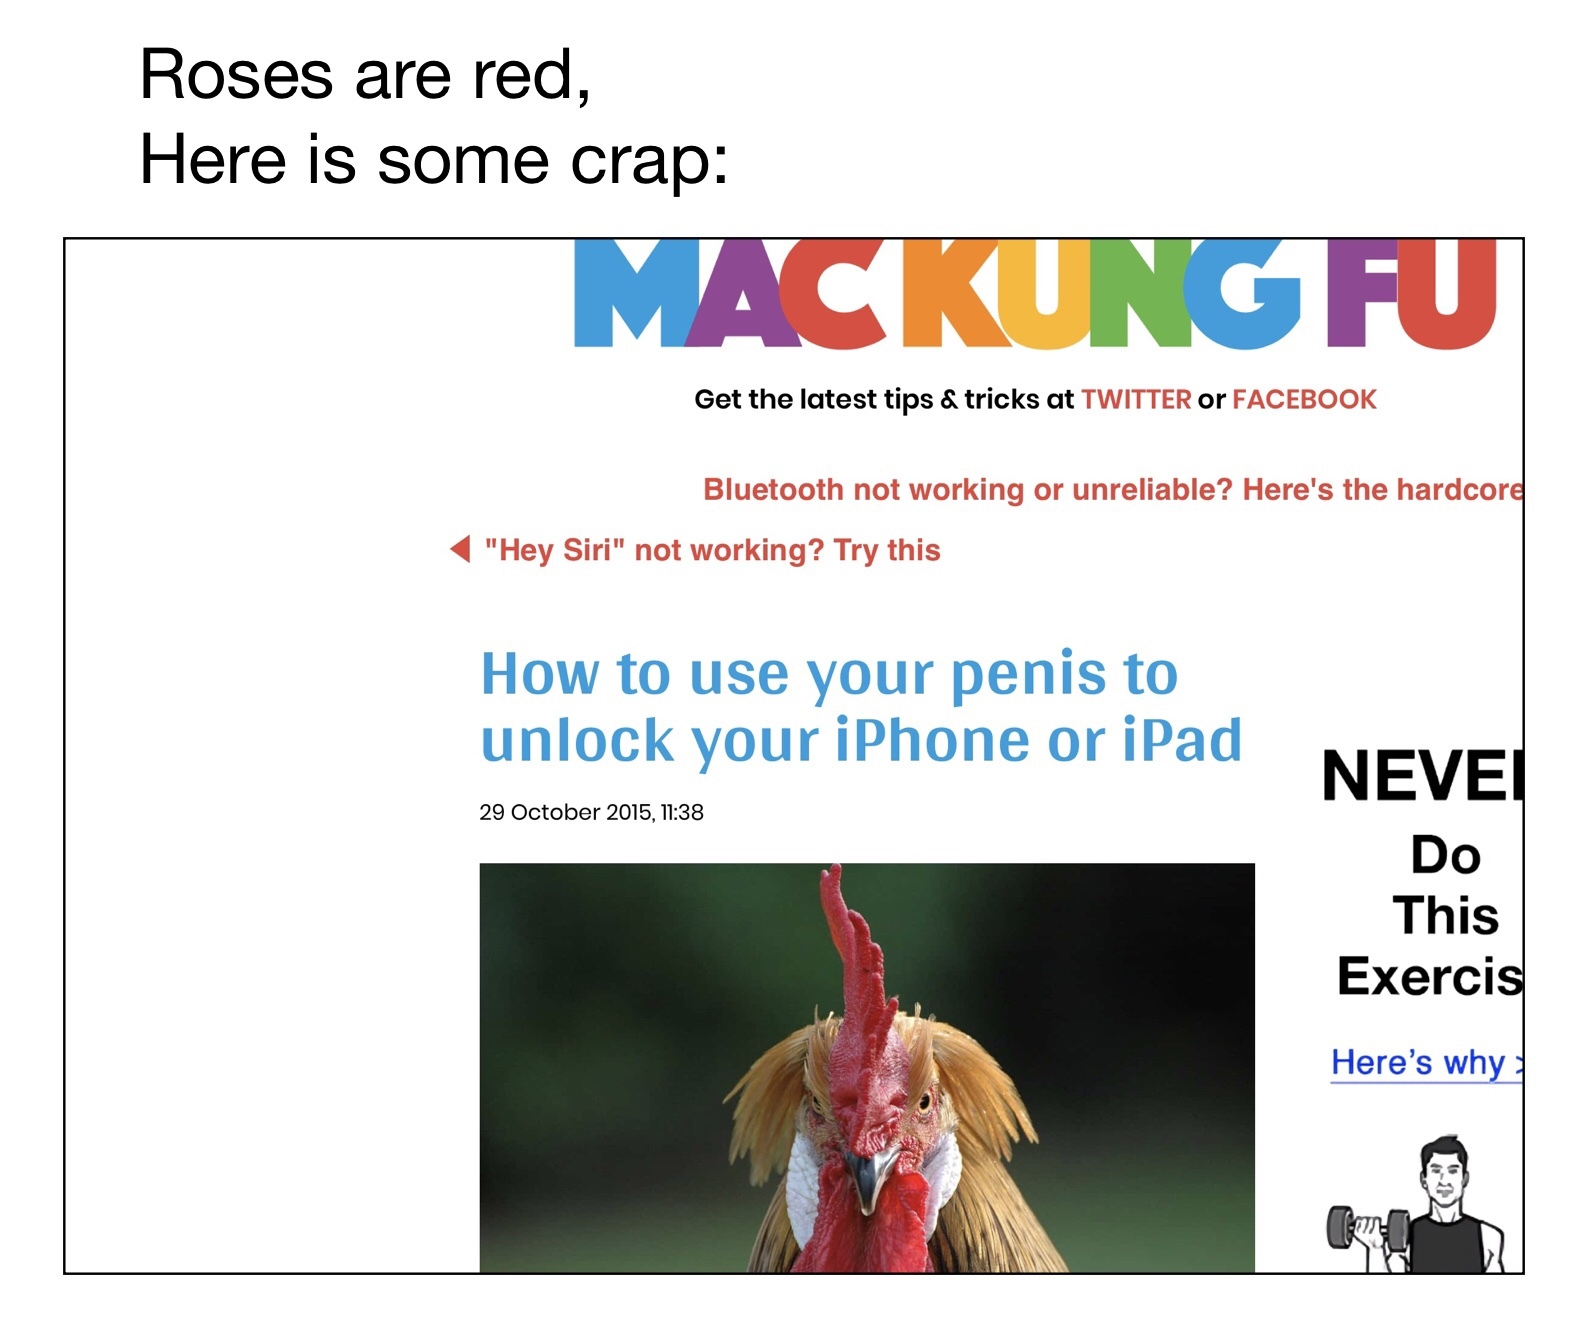 http://www.mackungfu.org/how-to-use-your-penis-to-unlock-your-iphone-or-ipad - meme